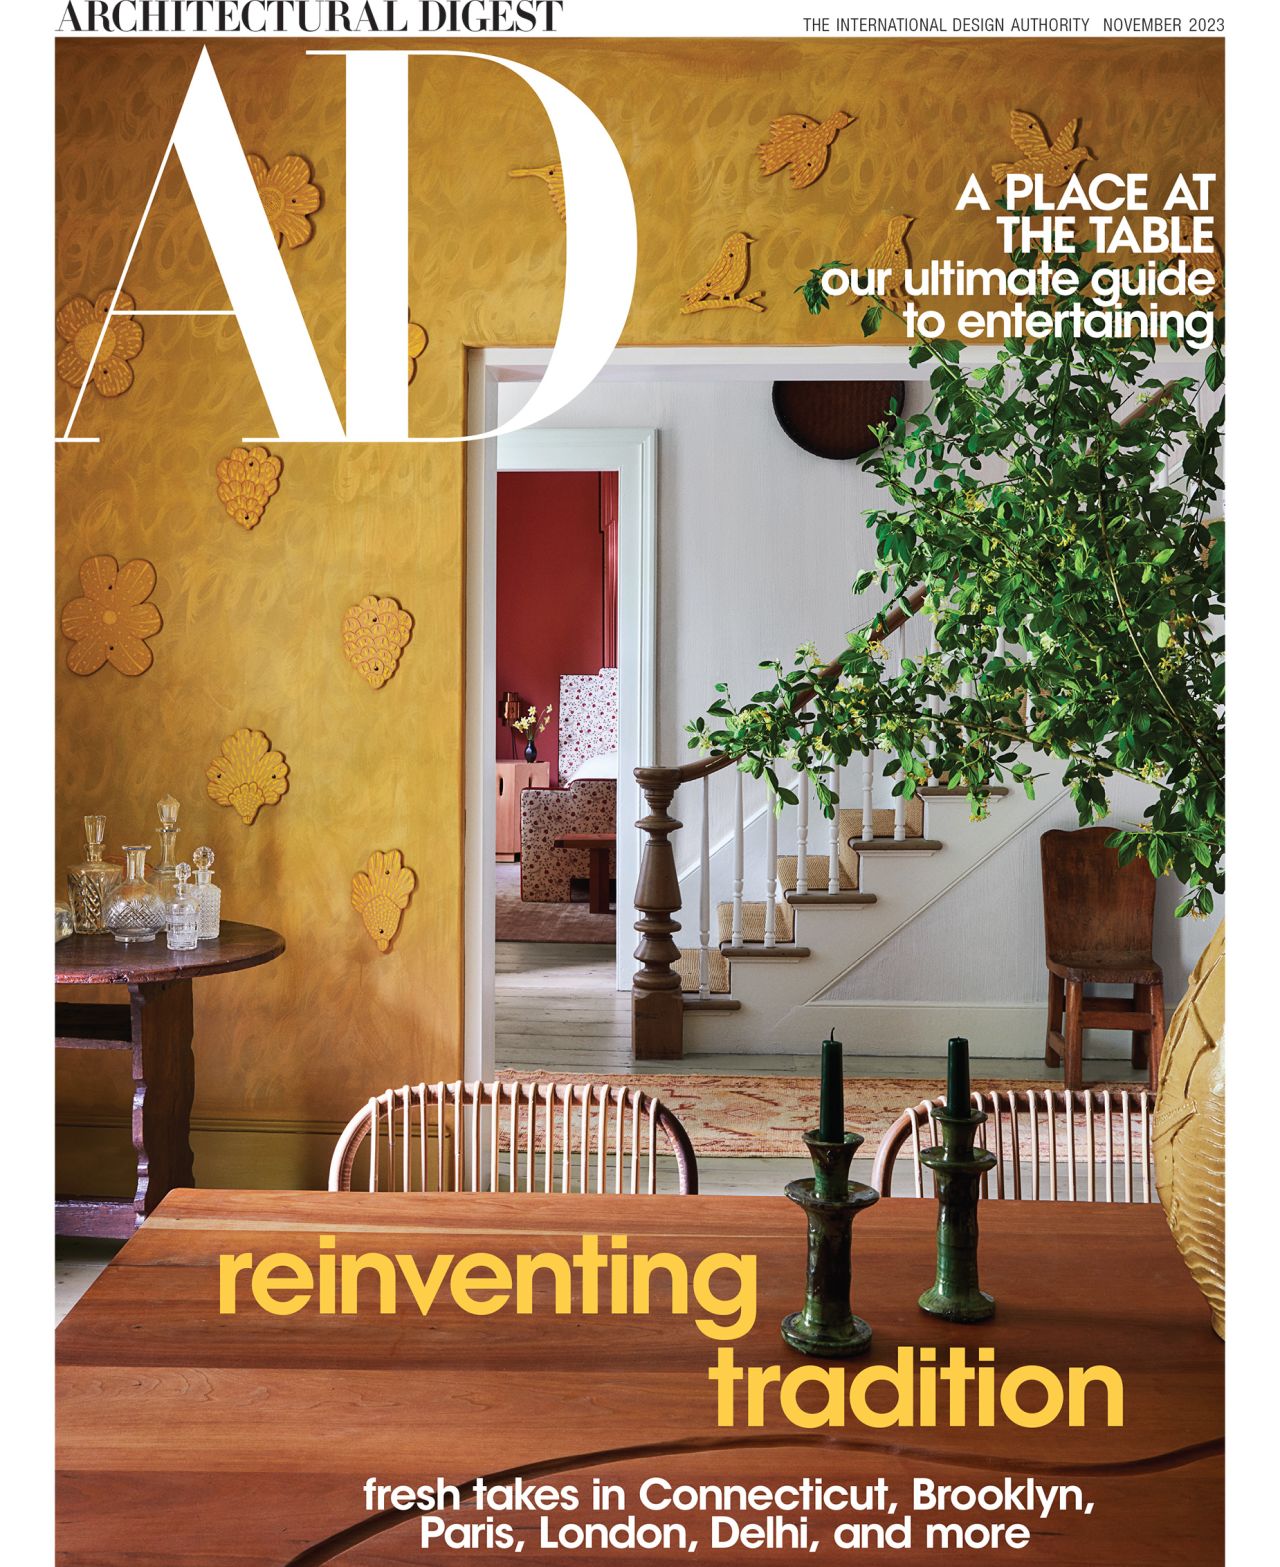 Suleika Jaouad's piece appears in the November 2023 issue of Architectural Digest.